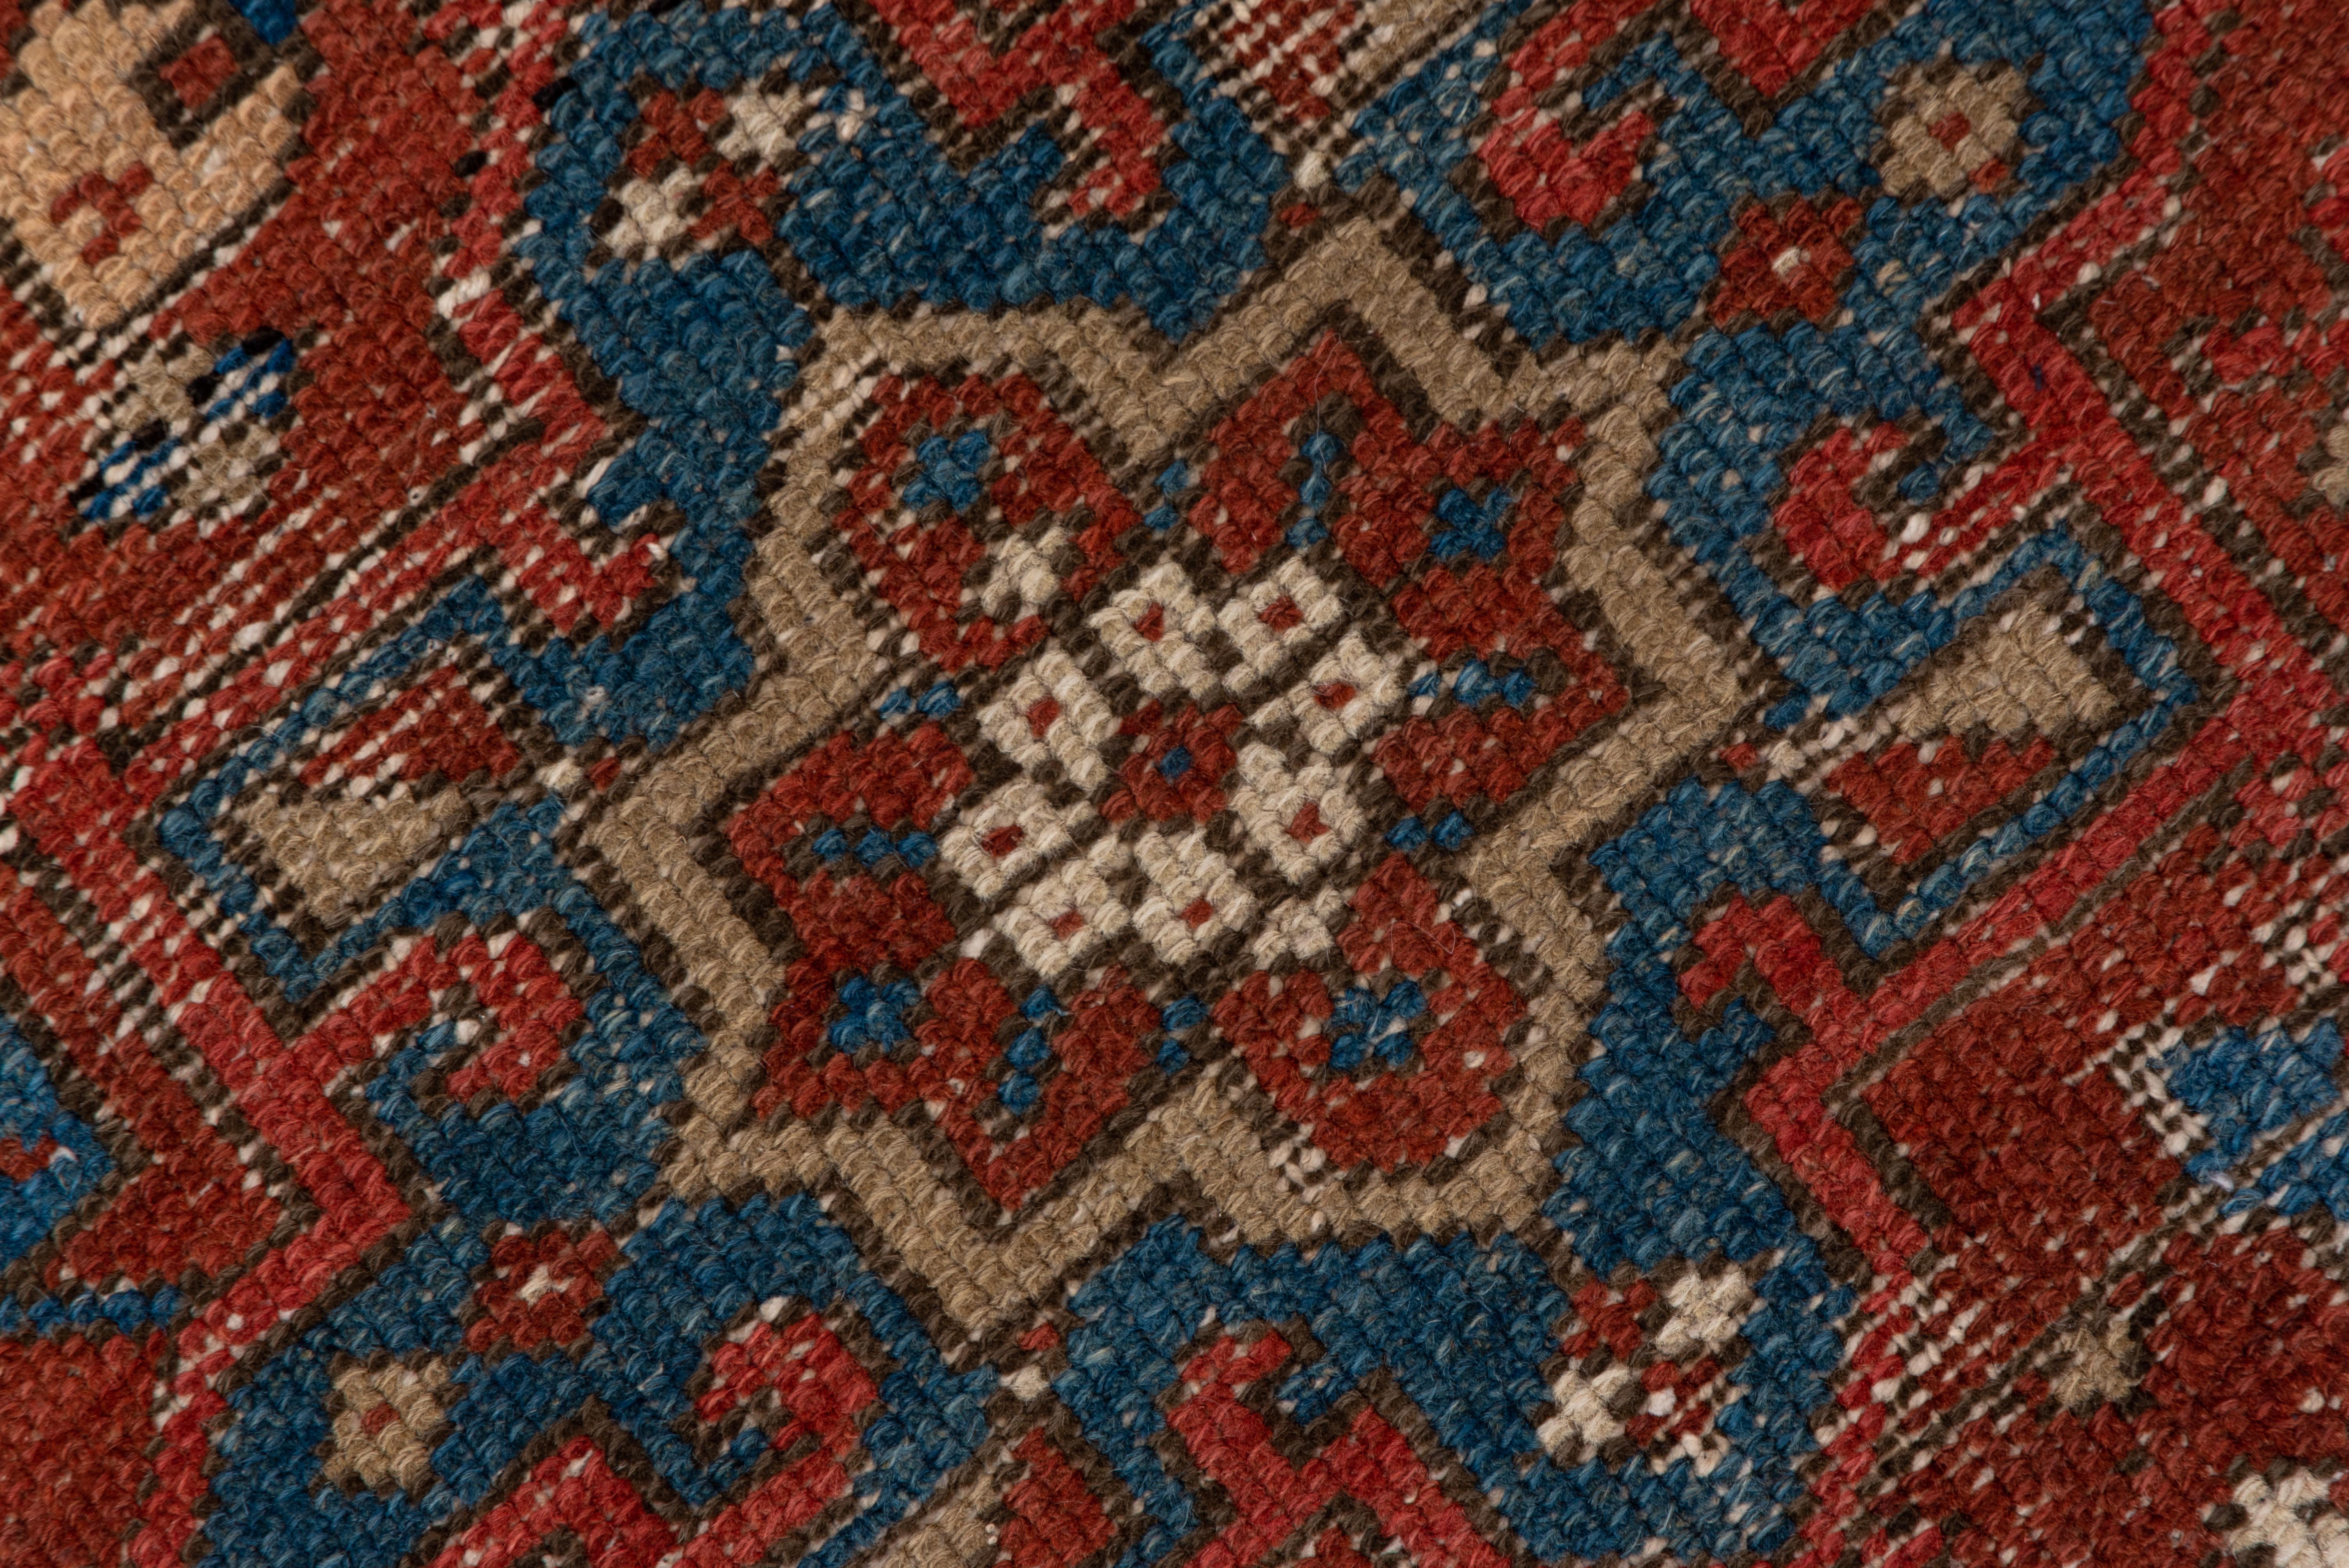 The ketchup red field of this worn, almost distressed NW Persian rustic scatter shows green and buff characteristic octogramme and hooked hexagon medallions. The royal blue border exhibits squared rosettes in ecru, straw, red and green.